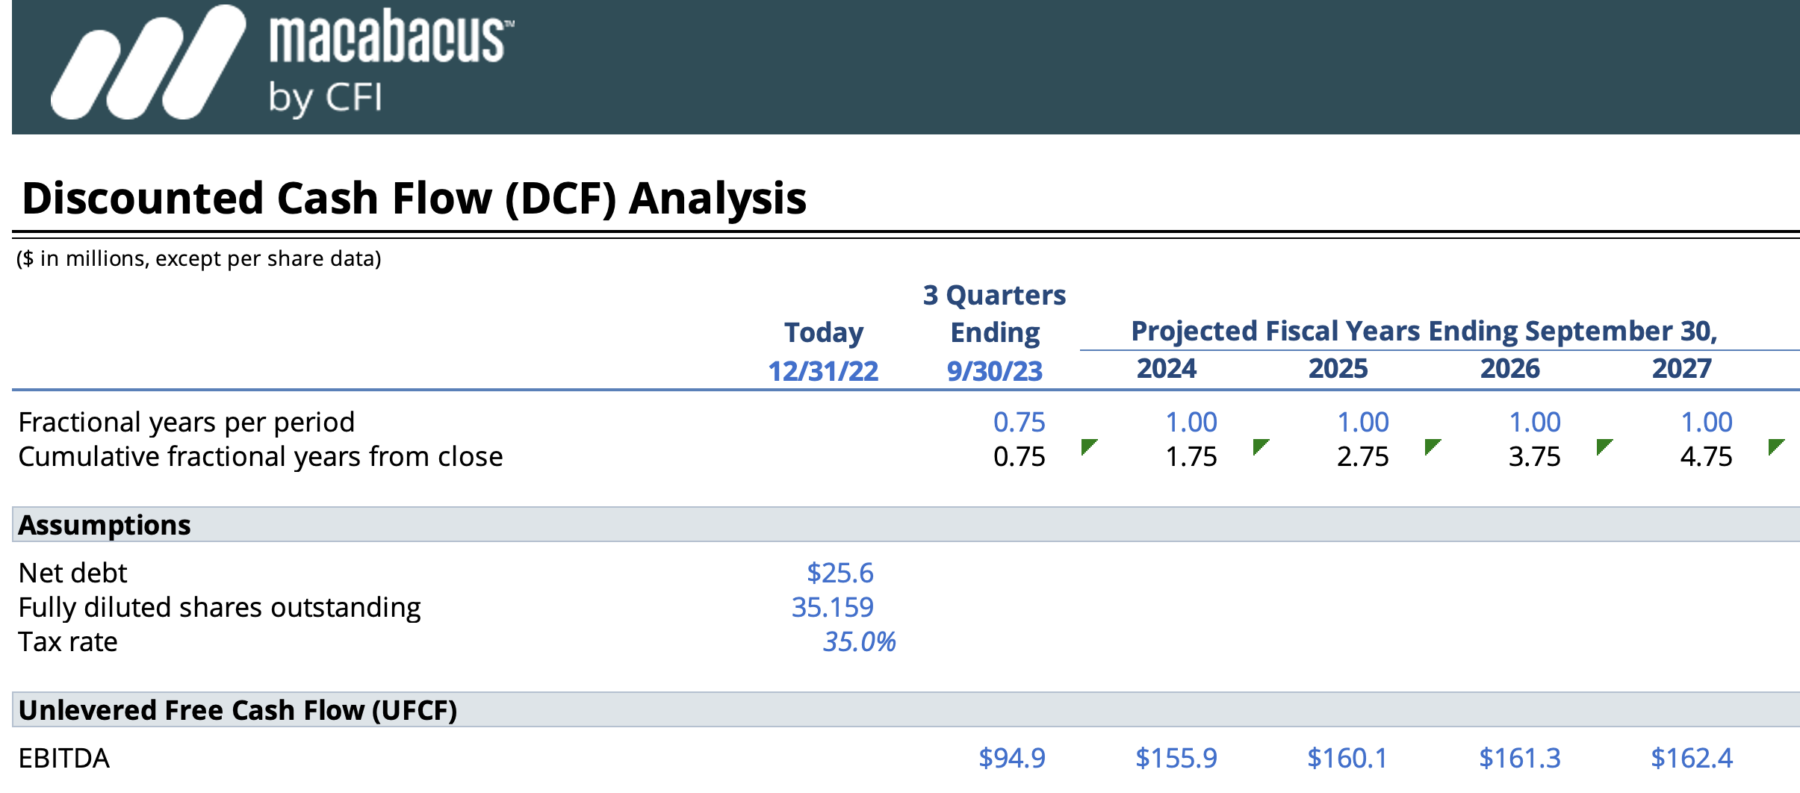 Discounted Cash Flow (DCF) Model Macabacus